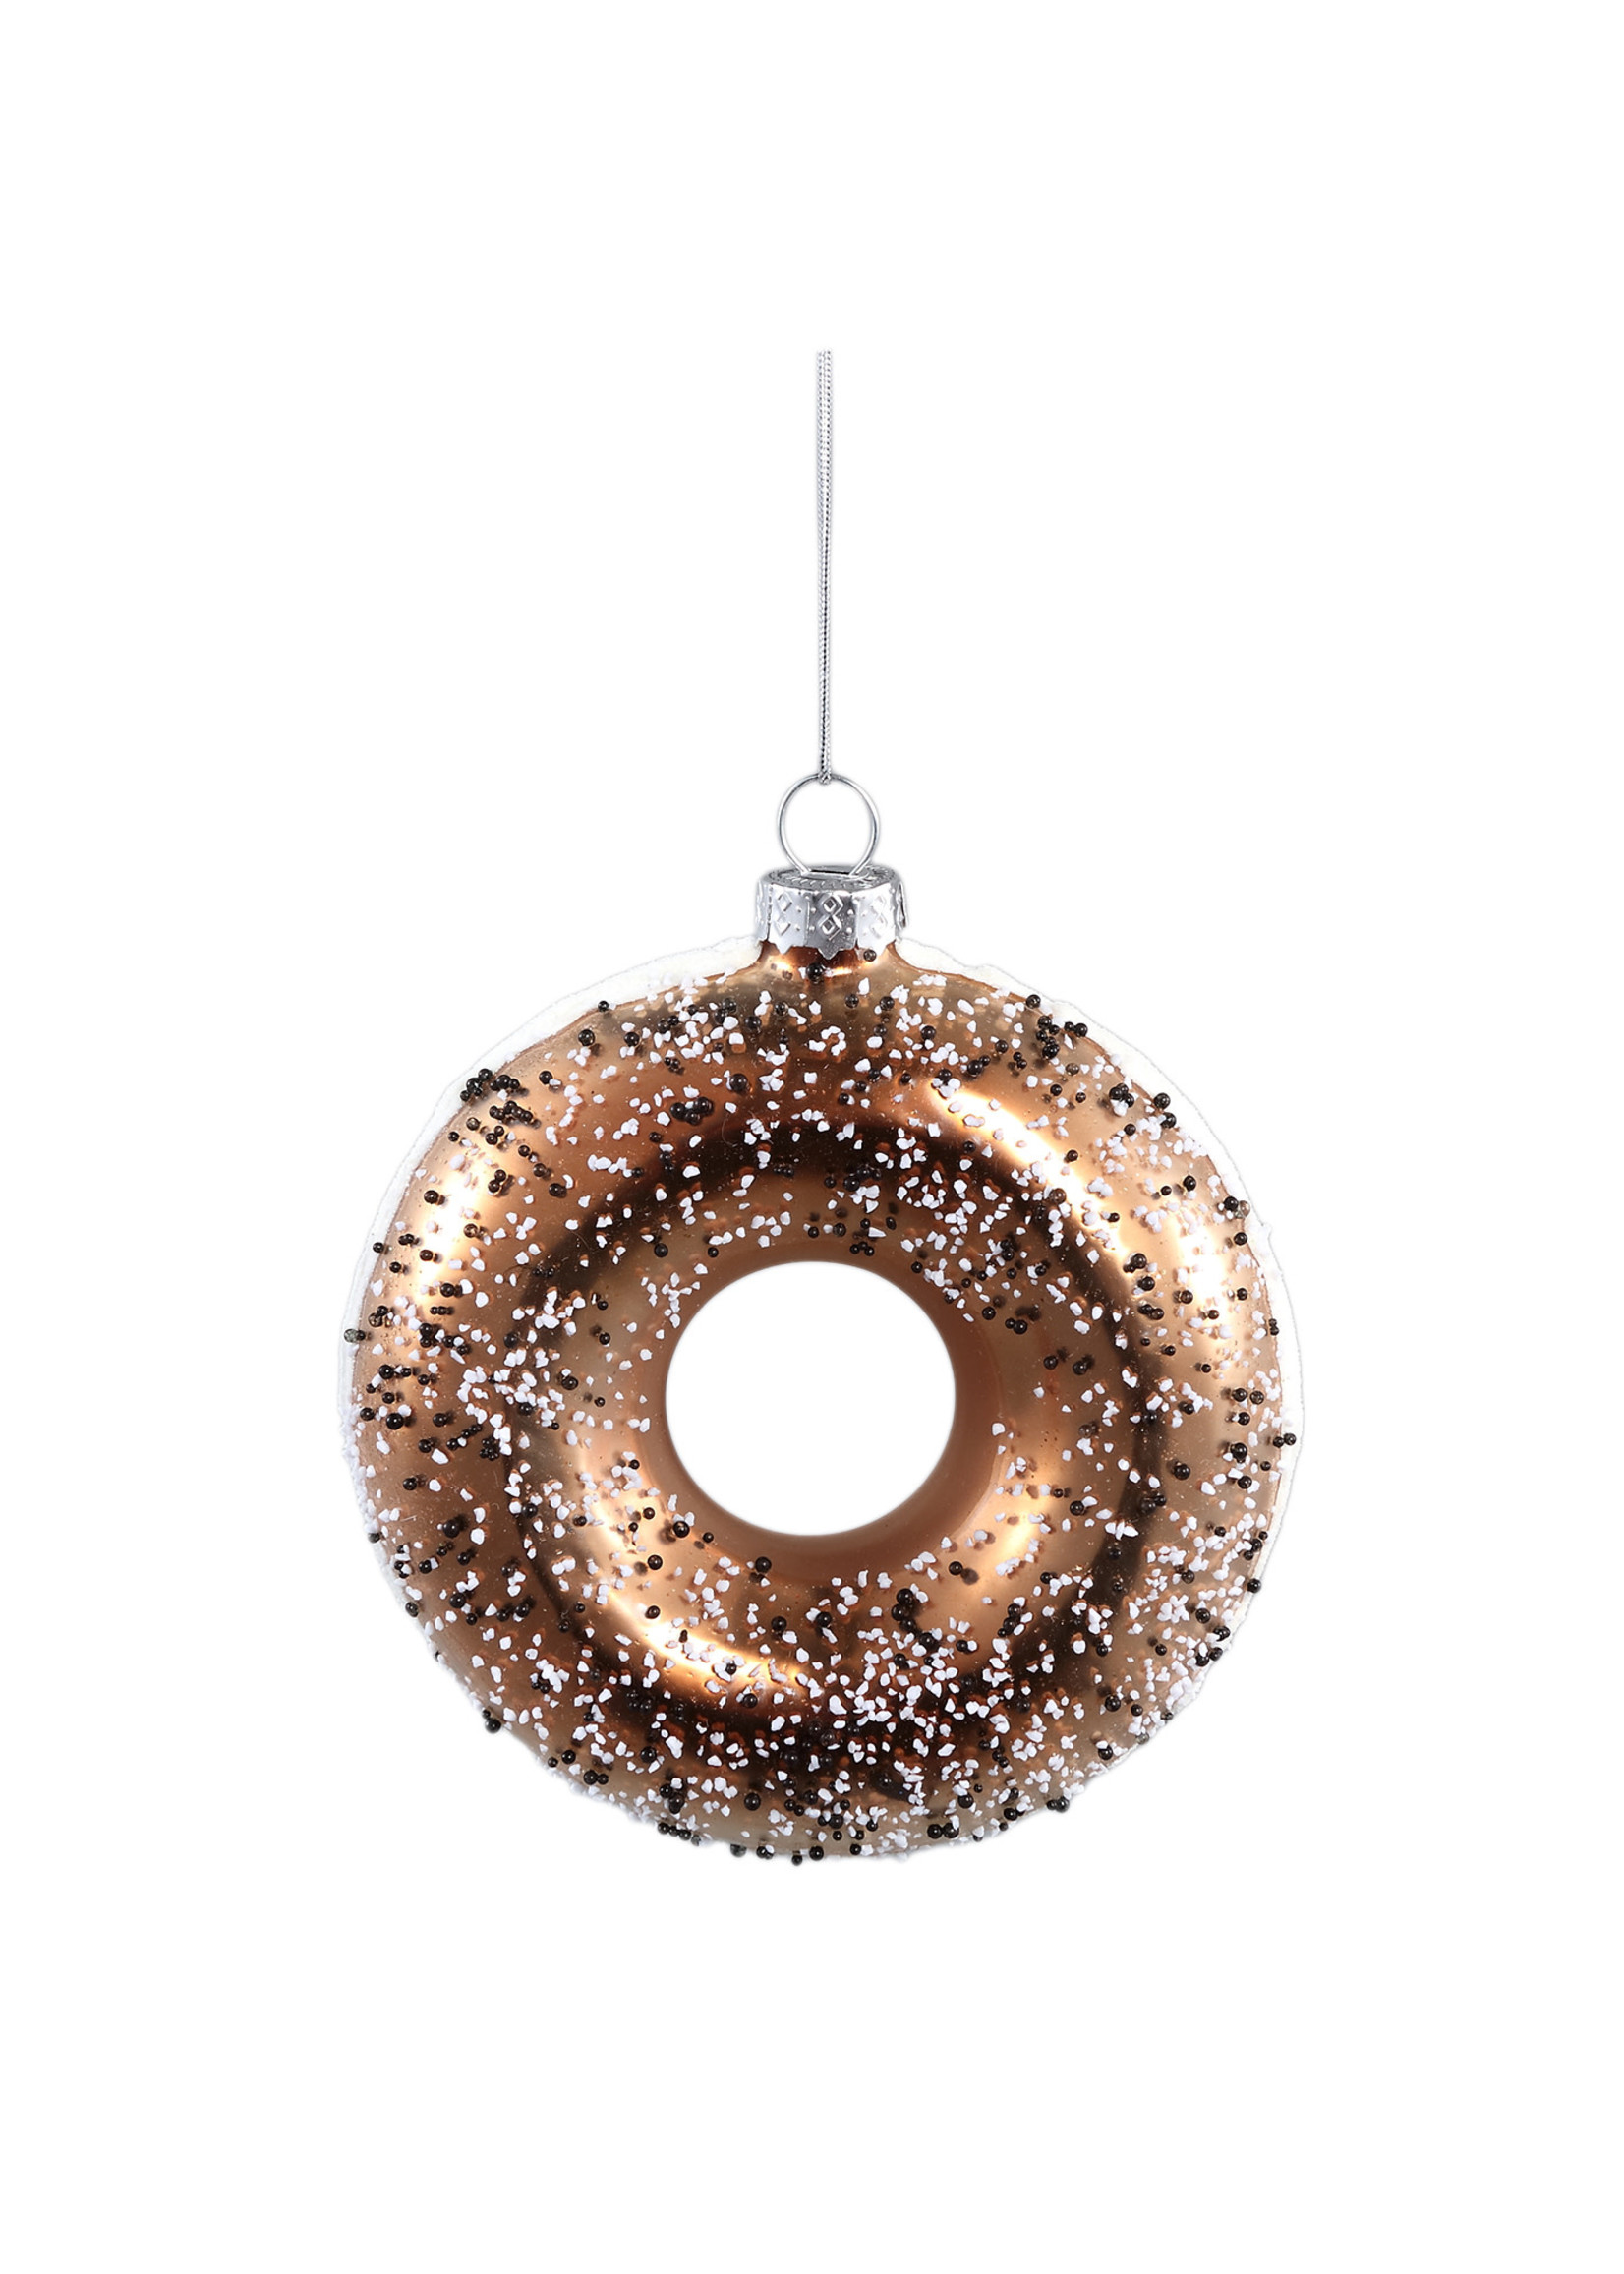 PTMD Xmas Donut Brown glass hanging ornament with sprin